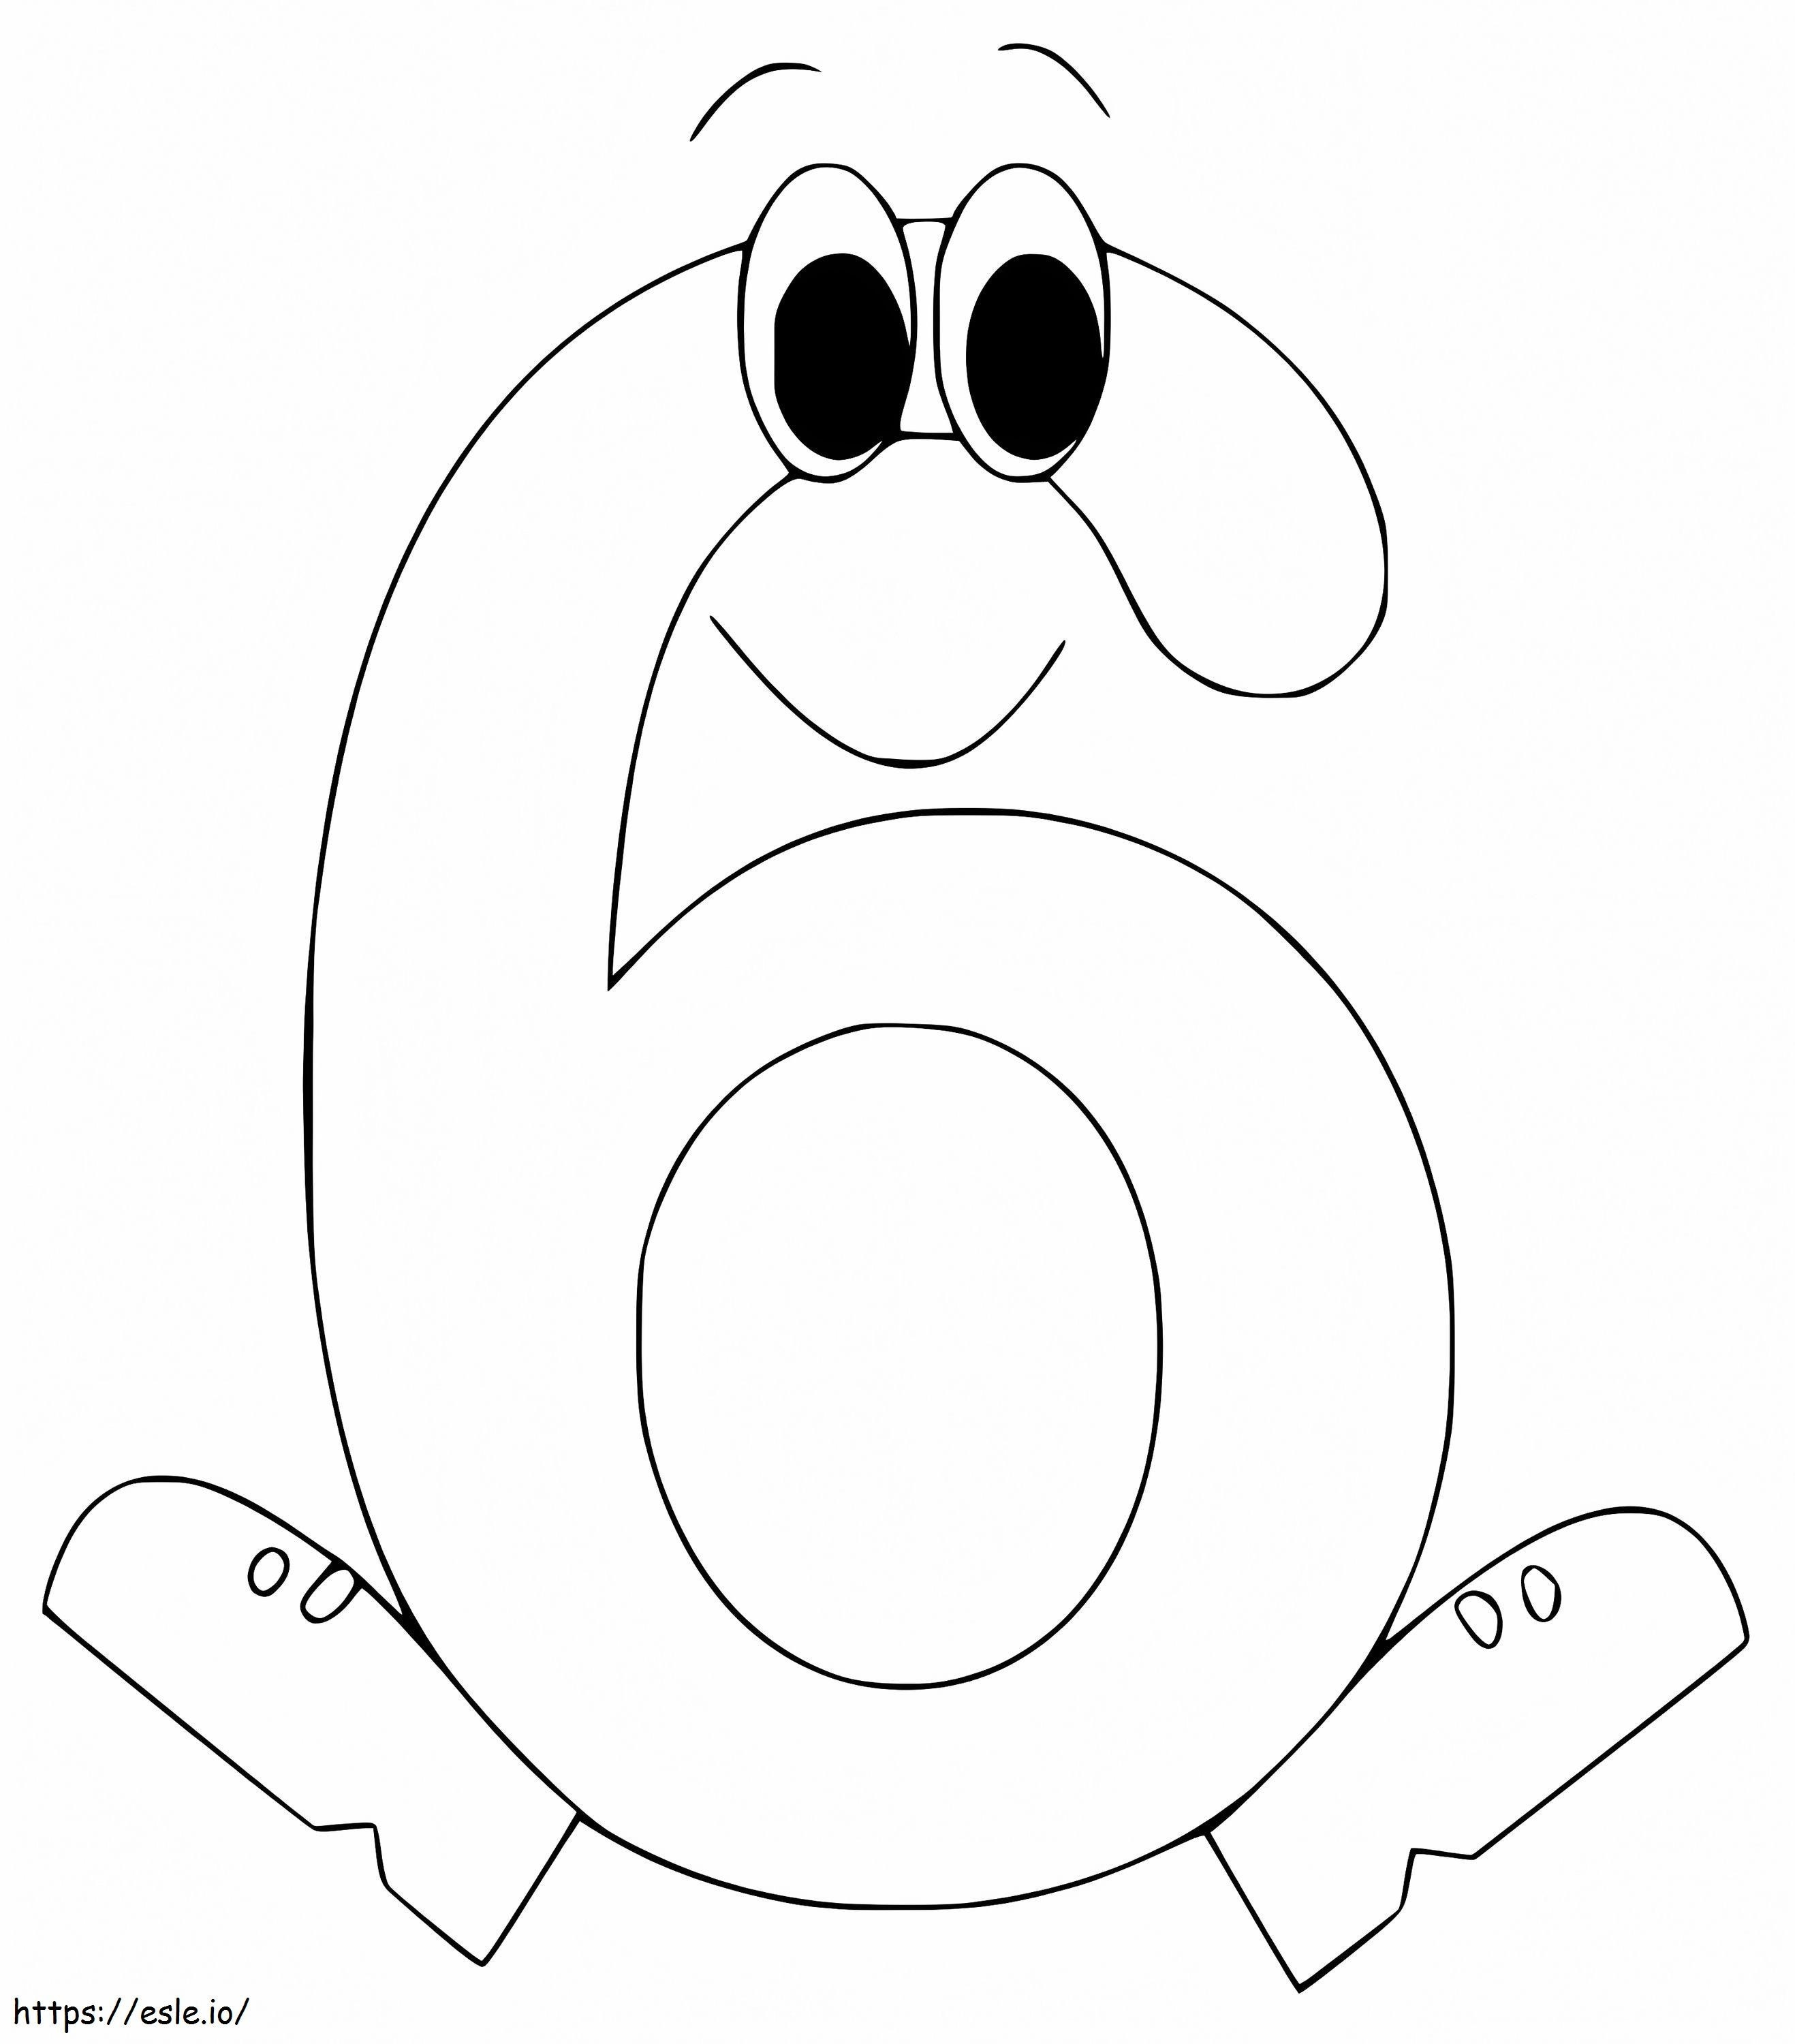 Cute Number 6 coloring page